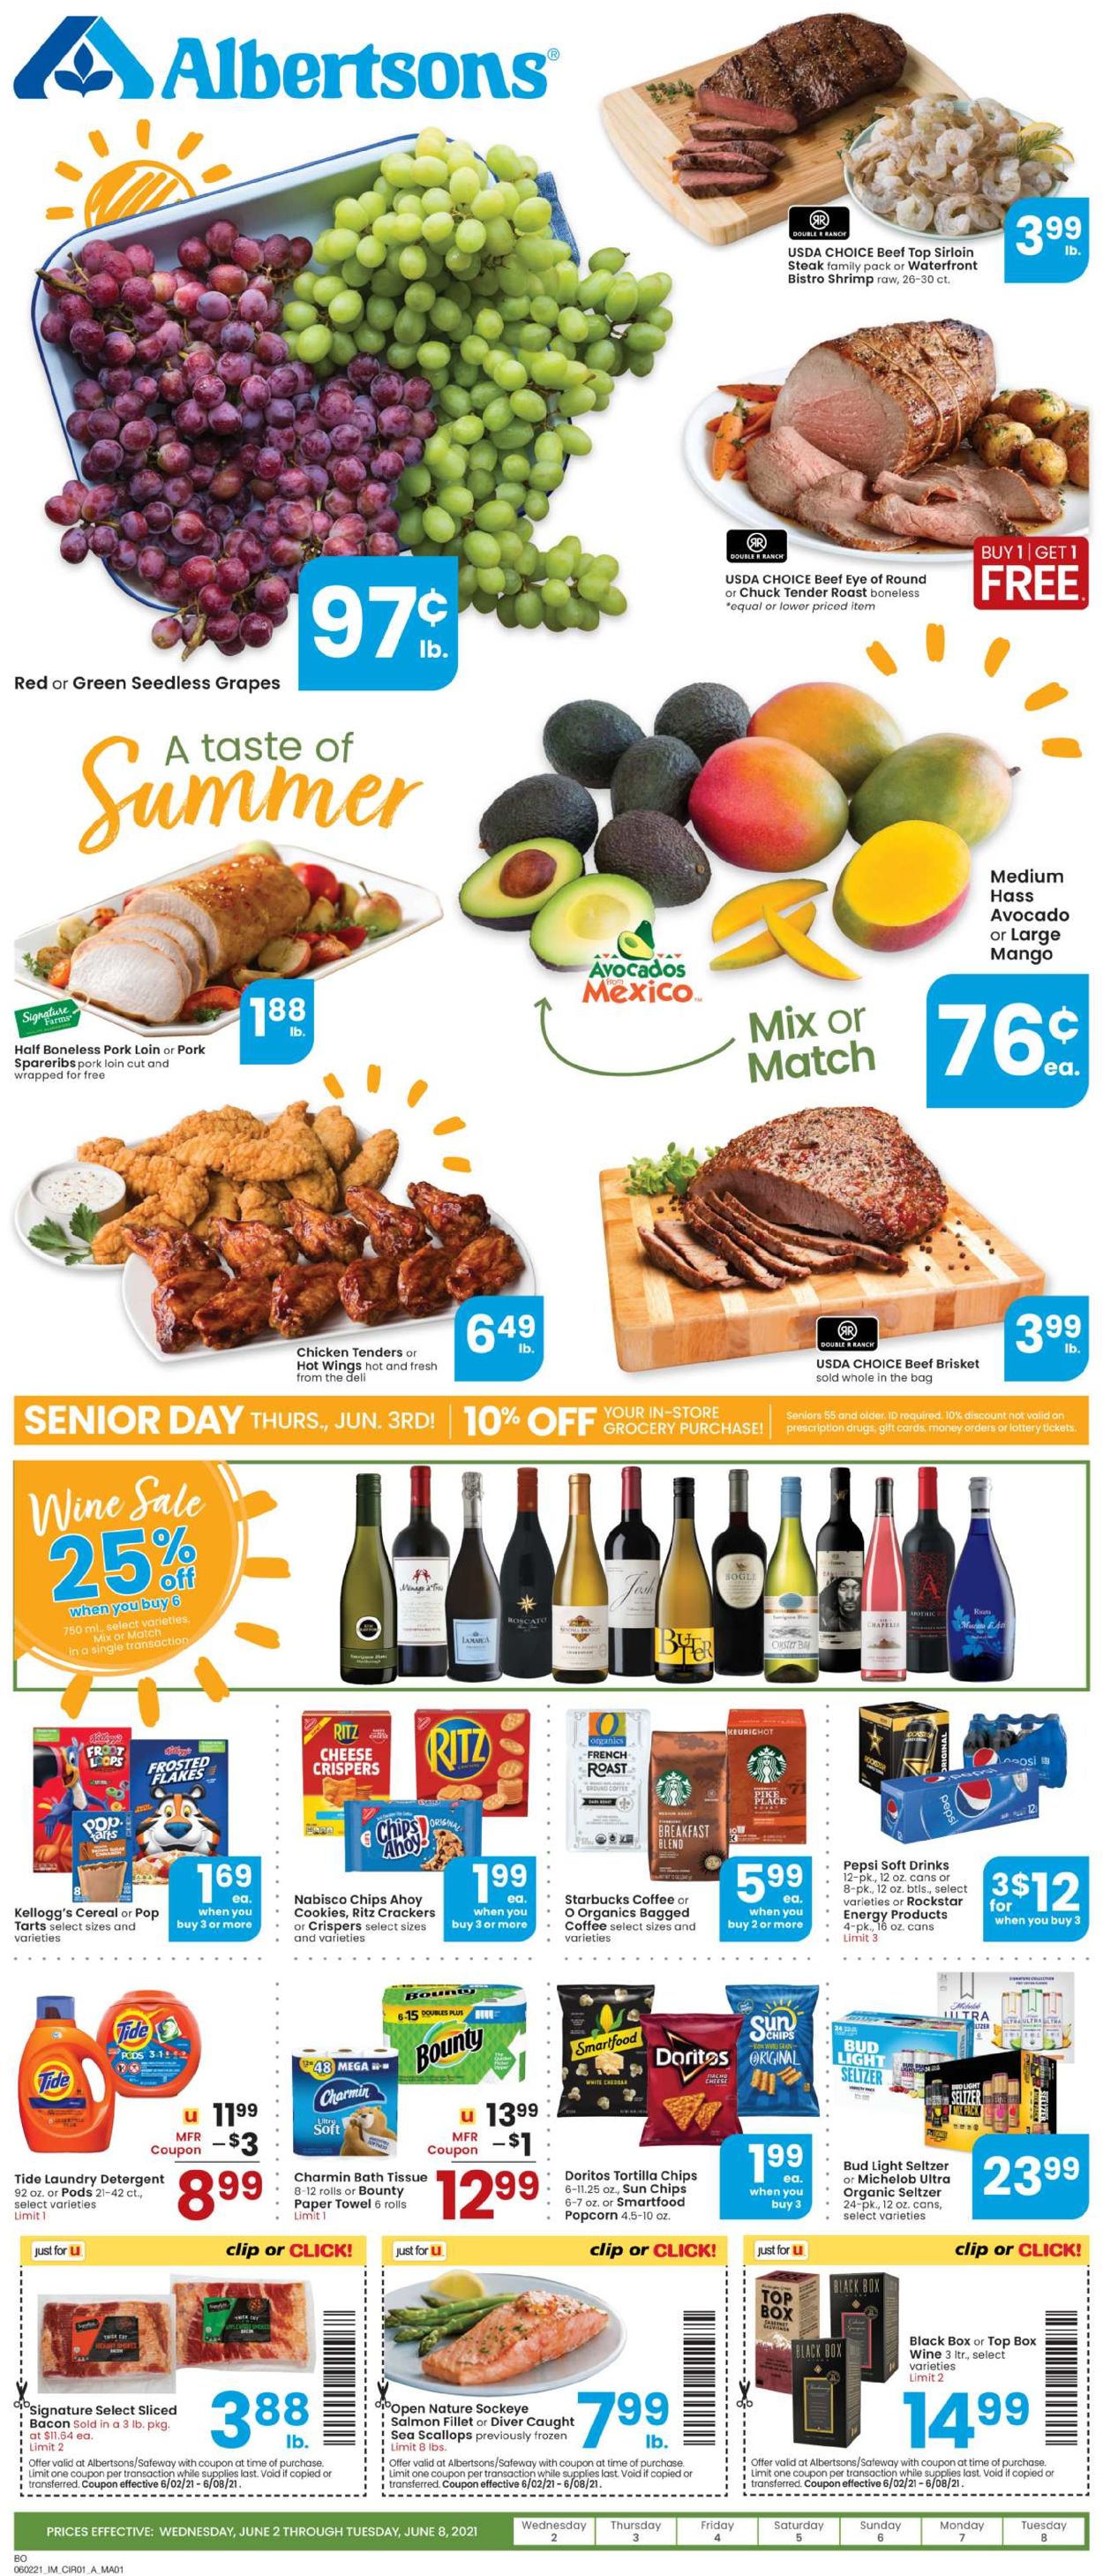 Albertsons Current weekly ad 06/02 - 06/08/2021 - frequent-ads.com